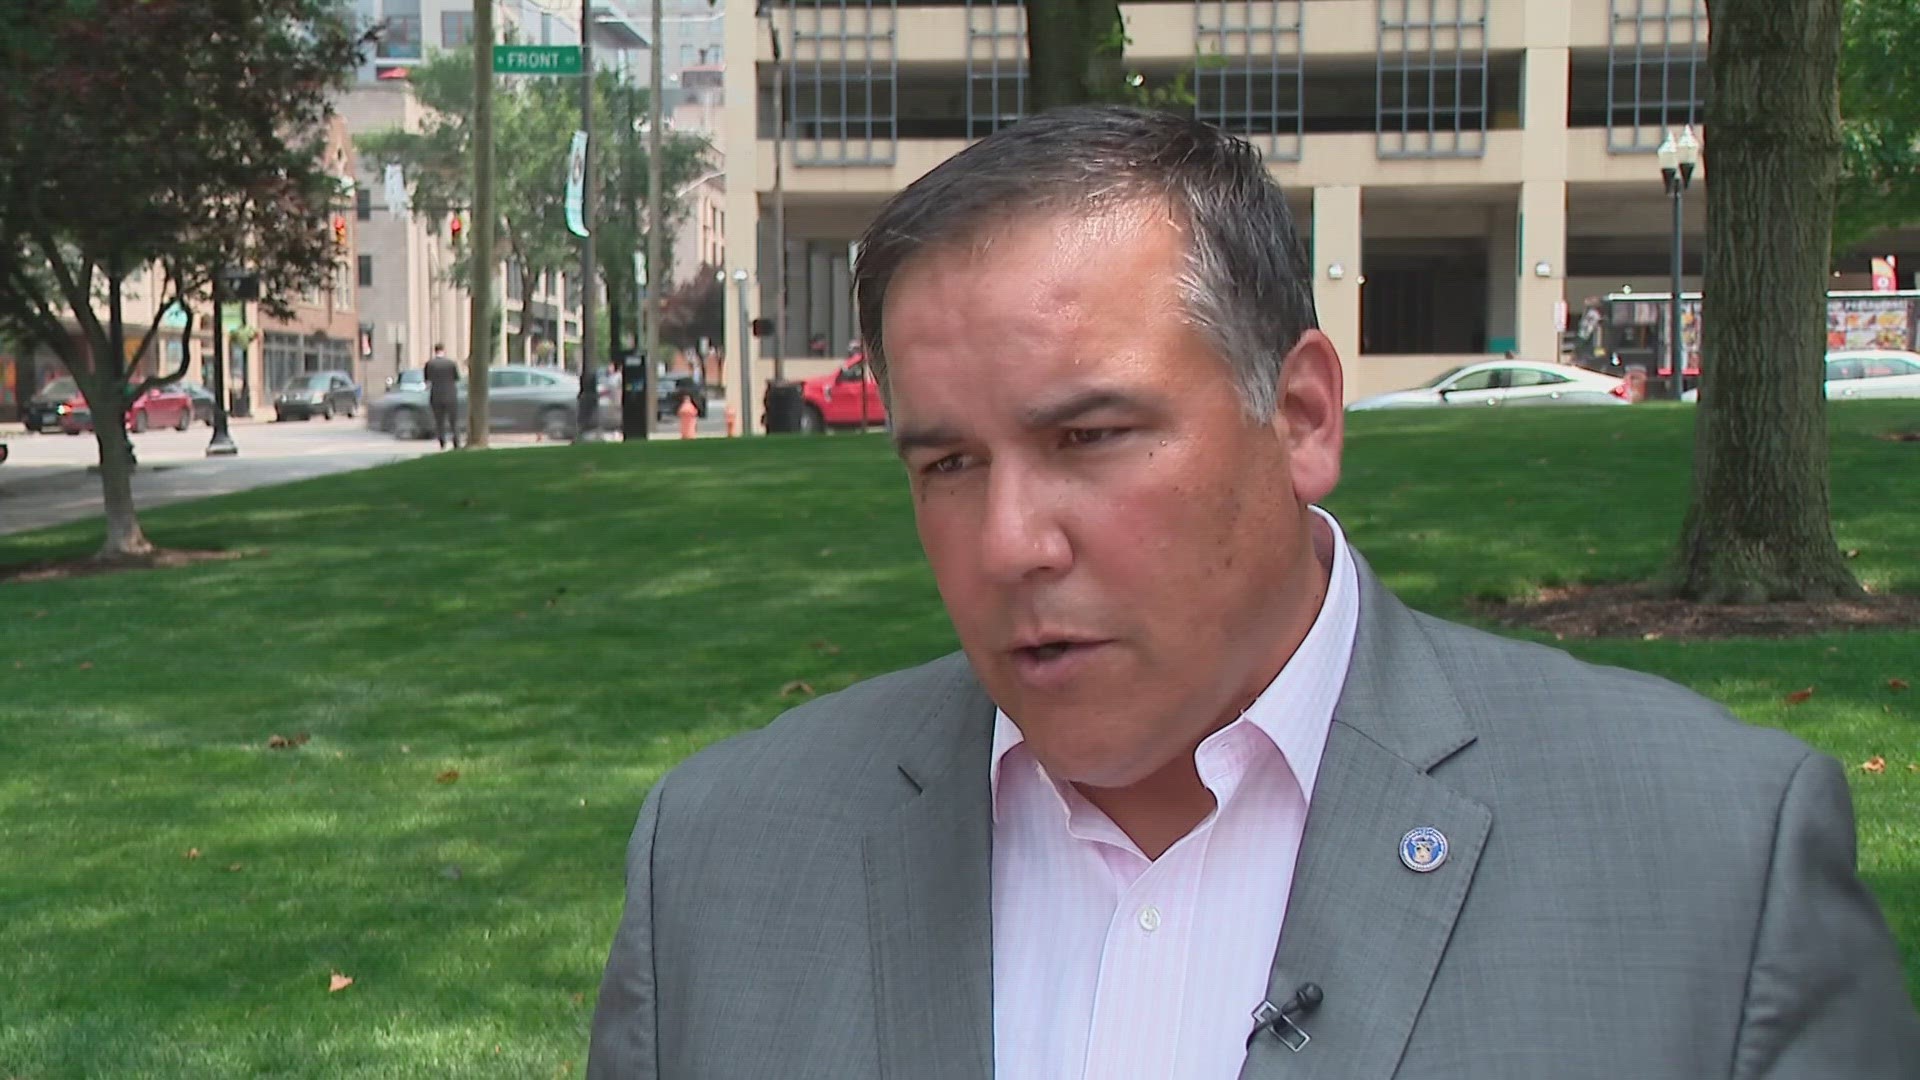 Columbus Mayor Andrew Ginther is asking for the community's help after two separate shootings at two different apartment complexes.